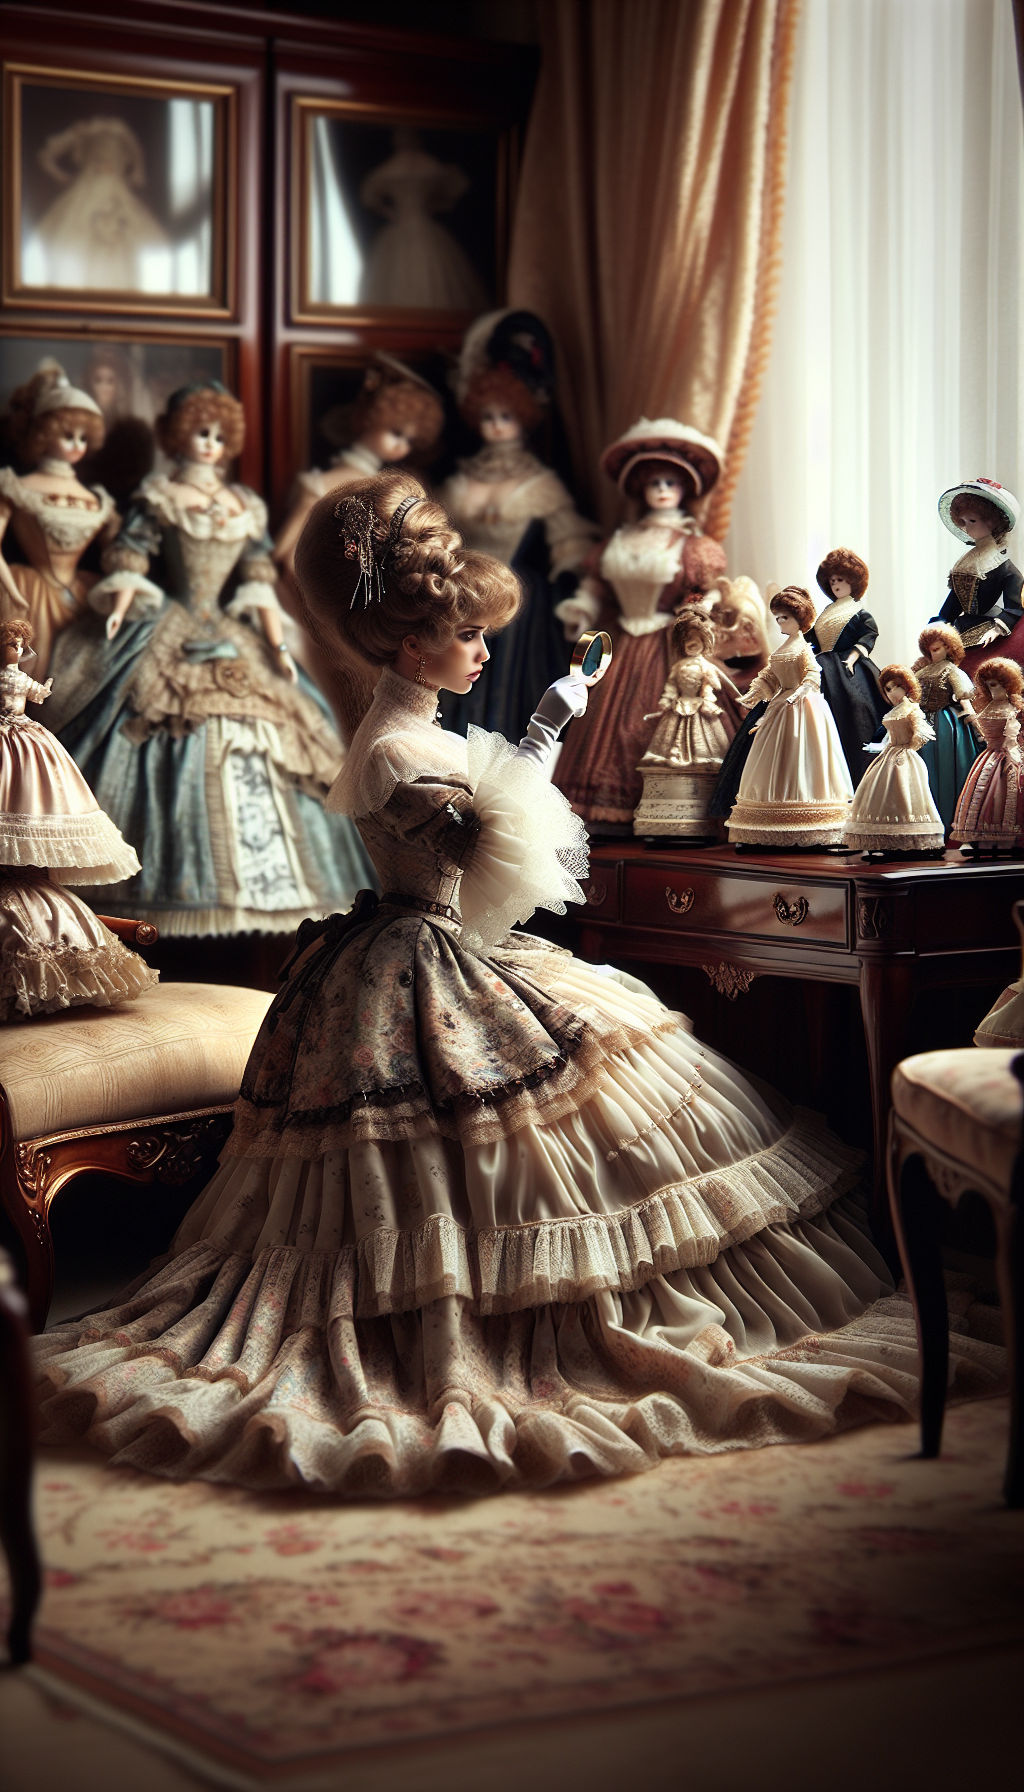 A Victorian lady gracefully seated amidst a lavish parlor, her intricate petticoat peeking out as she examines a collection of delicate porcelain dolls, each from a different decade within 1800s-1920s. She delicately holds a price tag magnifier highlighting their esteemed values, while the opulent details in her attire echo the fine craftsmanship of the dolls, bridging the eras with elegance and nostalgia.